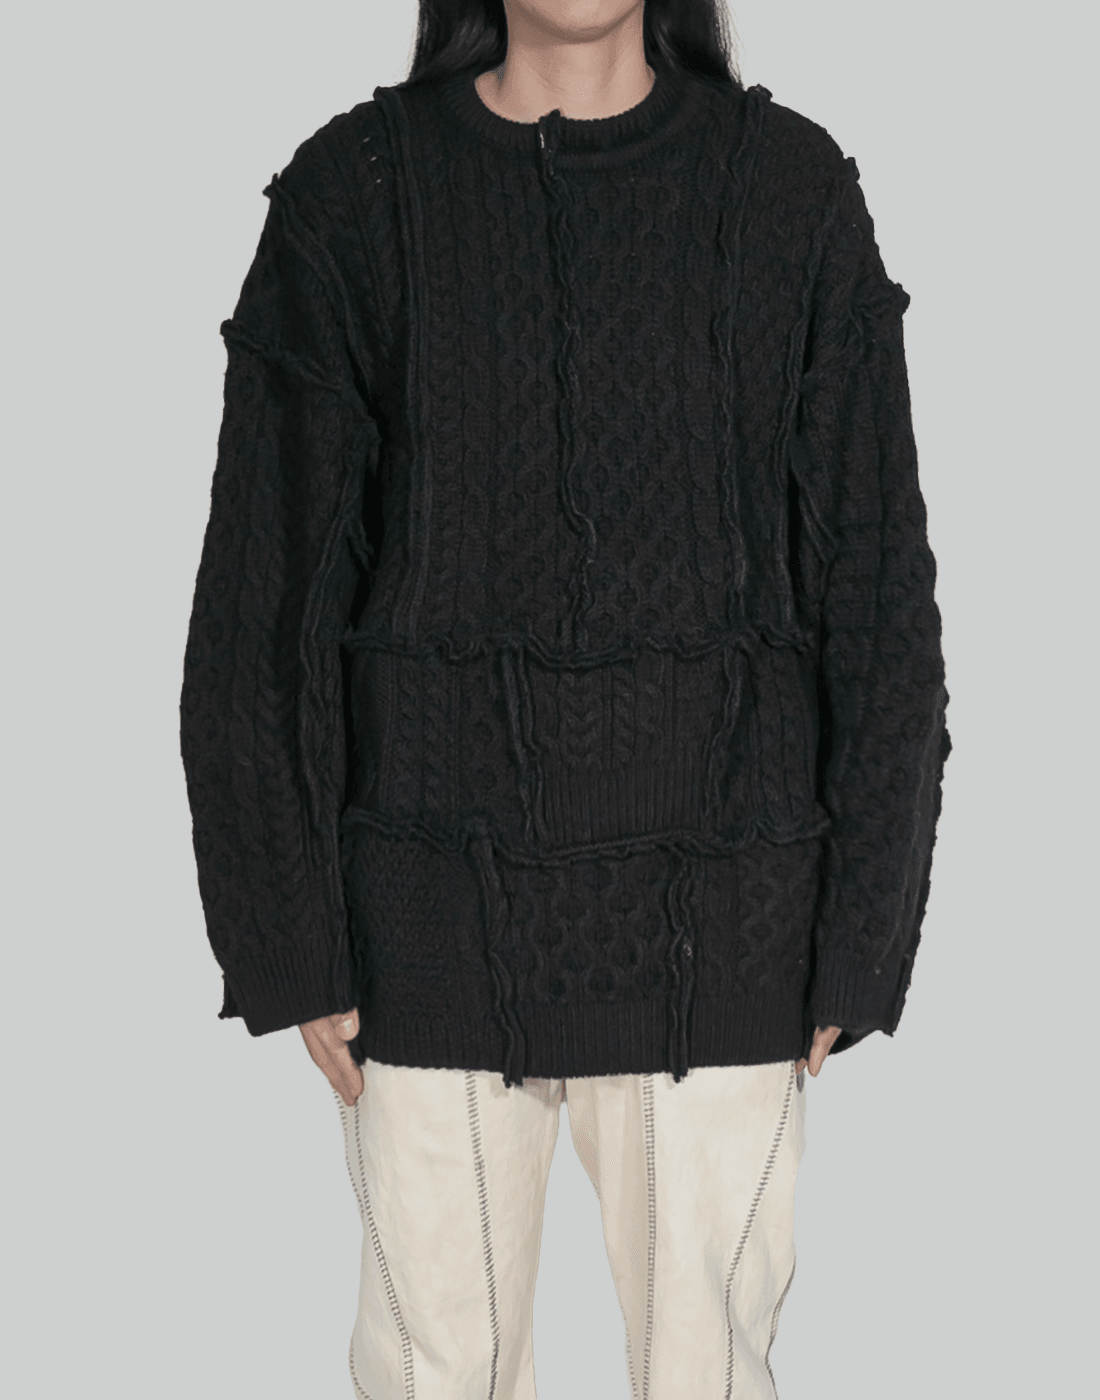 DISCOVERED Fisherman Patchwork Knit - 082plus